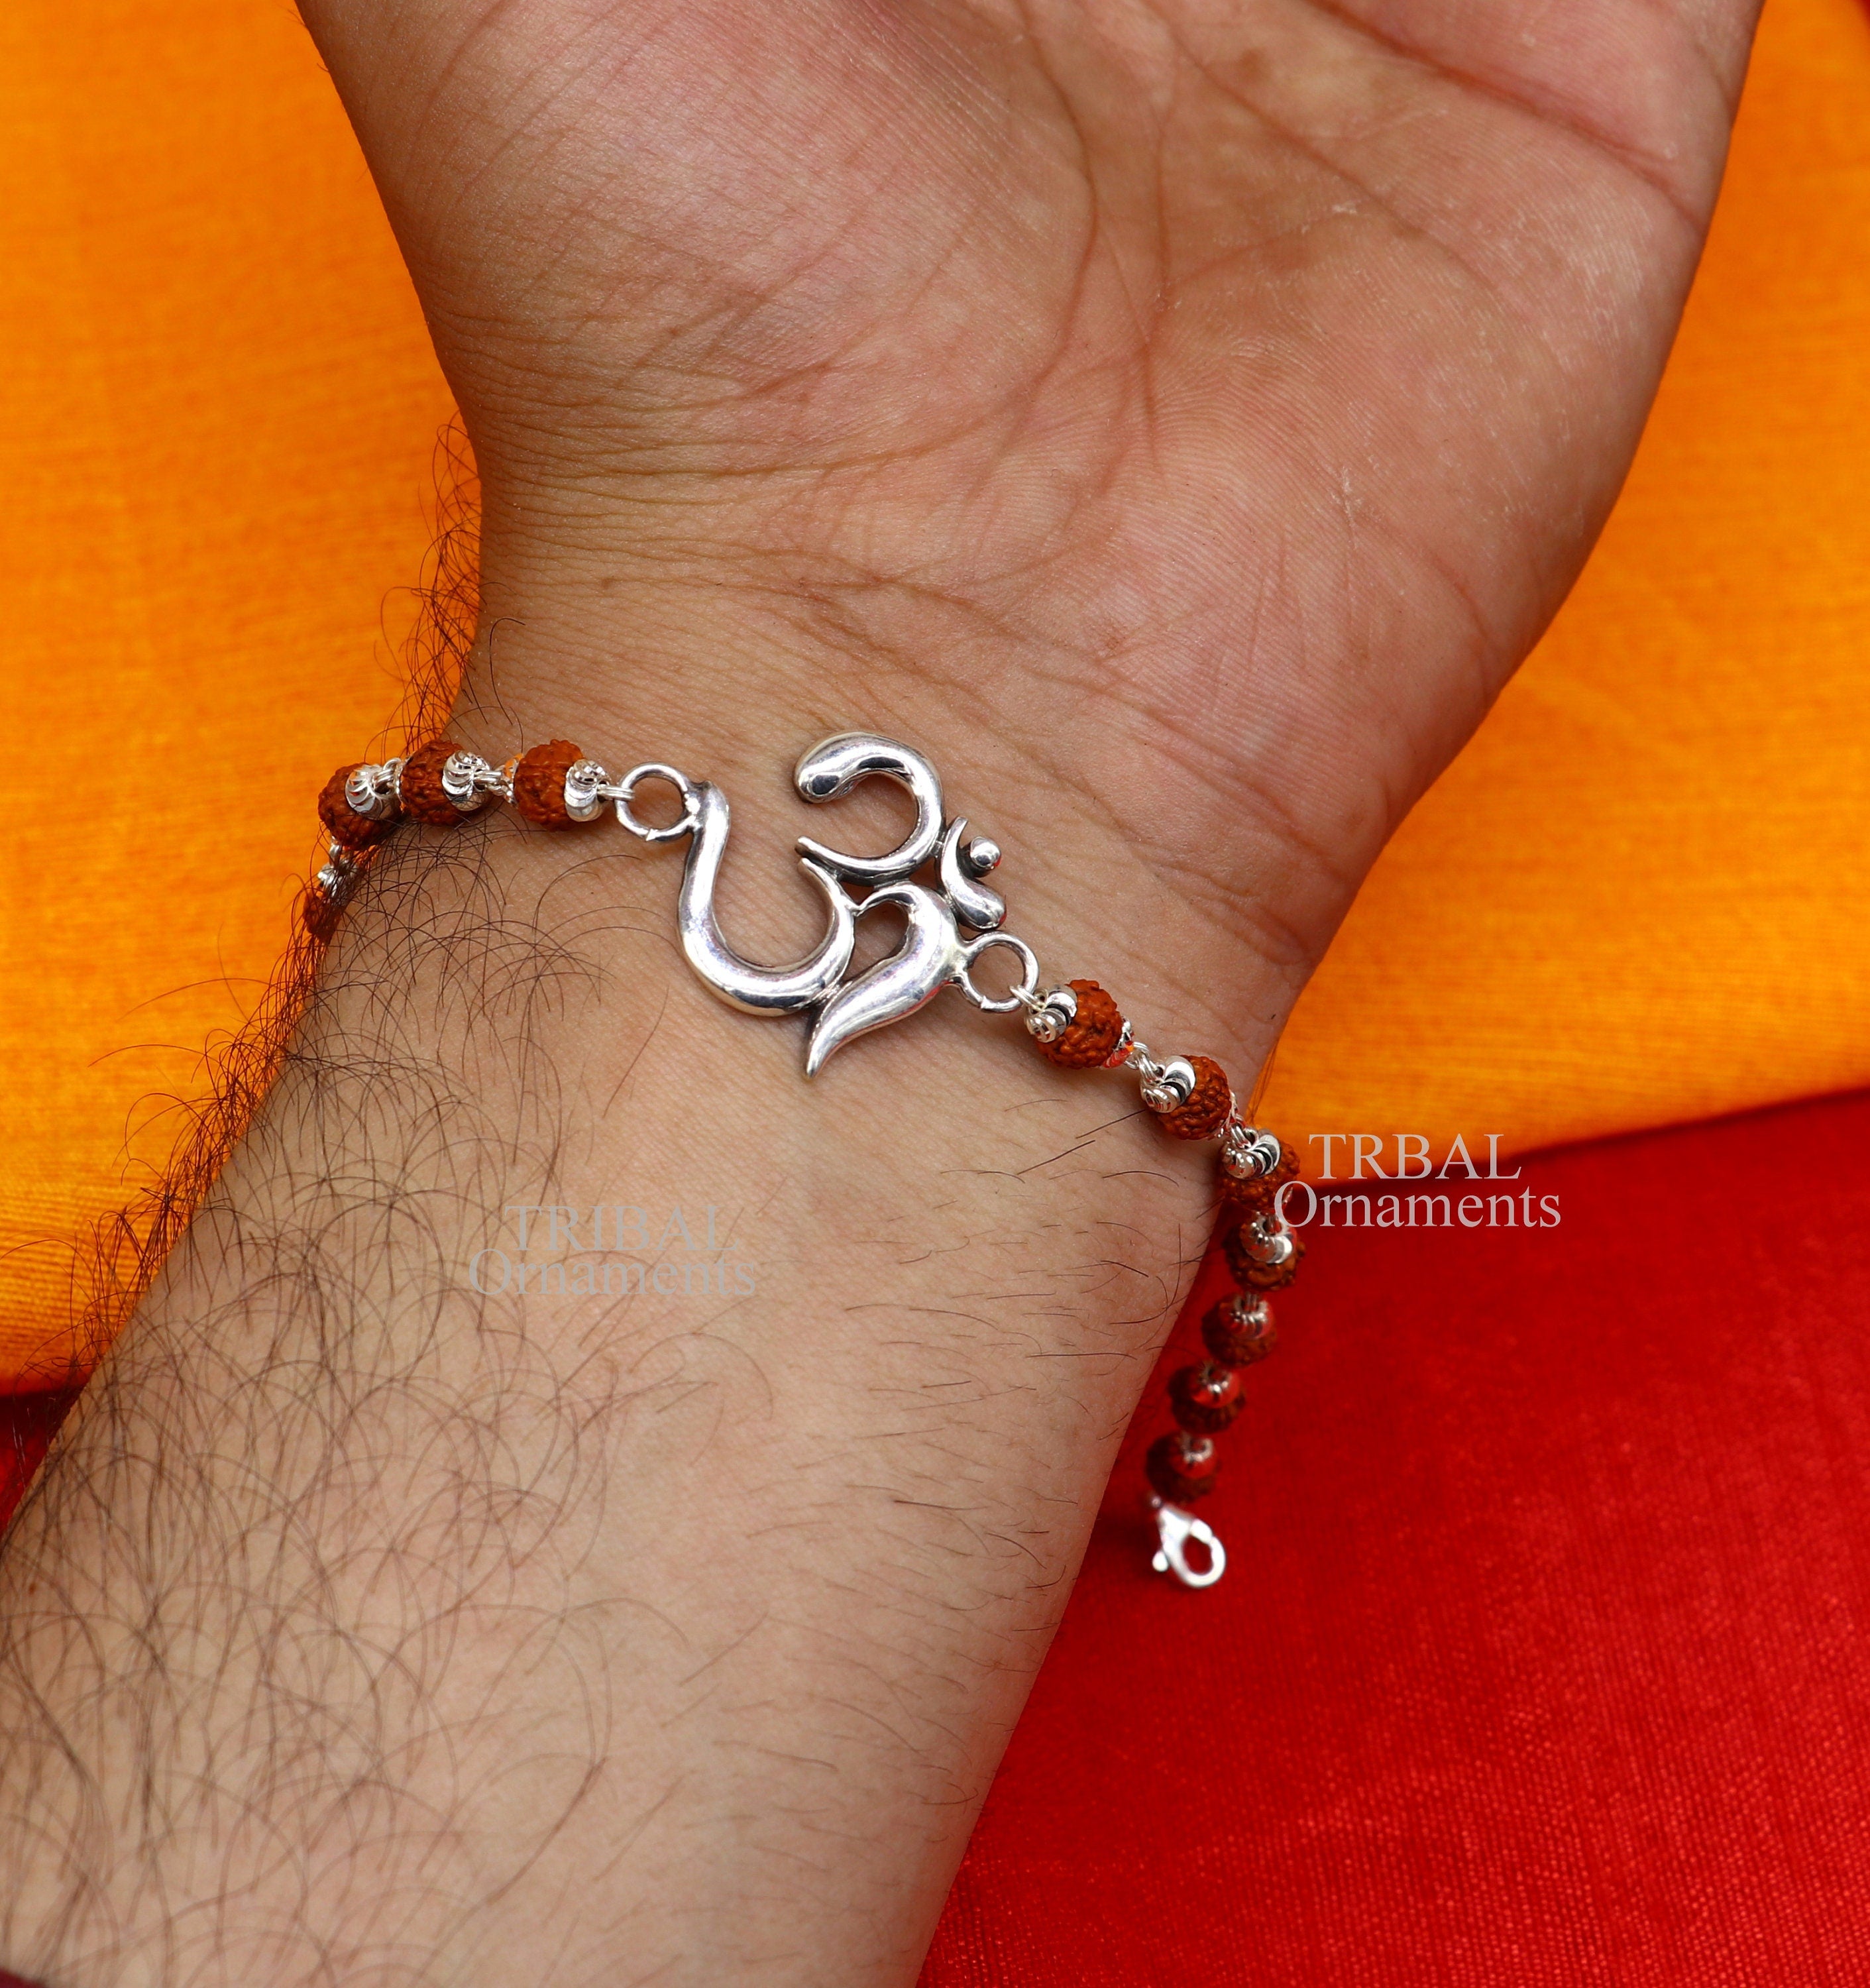 Ornate Jewels 925 Sterling Silver Personalized Bhai Rakhi Bracelet for  Brother Buy Ornate Jewels 925 Sterling Silver Personalized Bhai Rakhi  Bracelet for Brother Online at Best Price in India  Nykaa